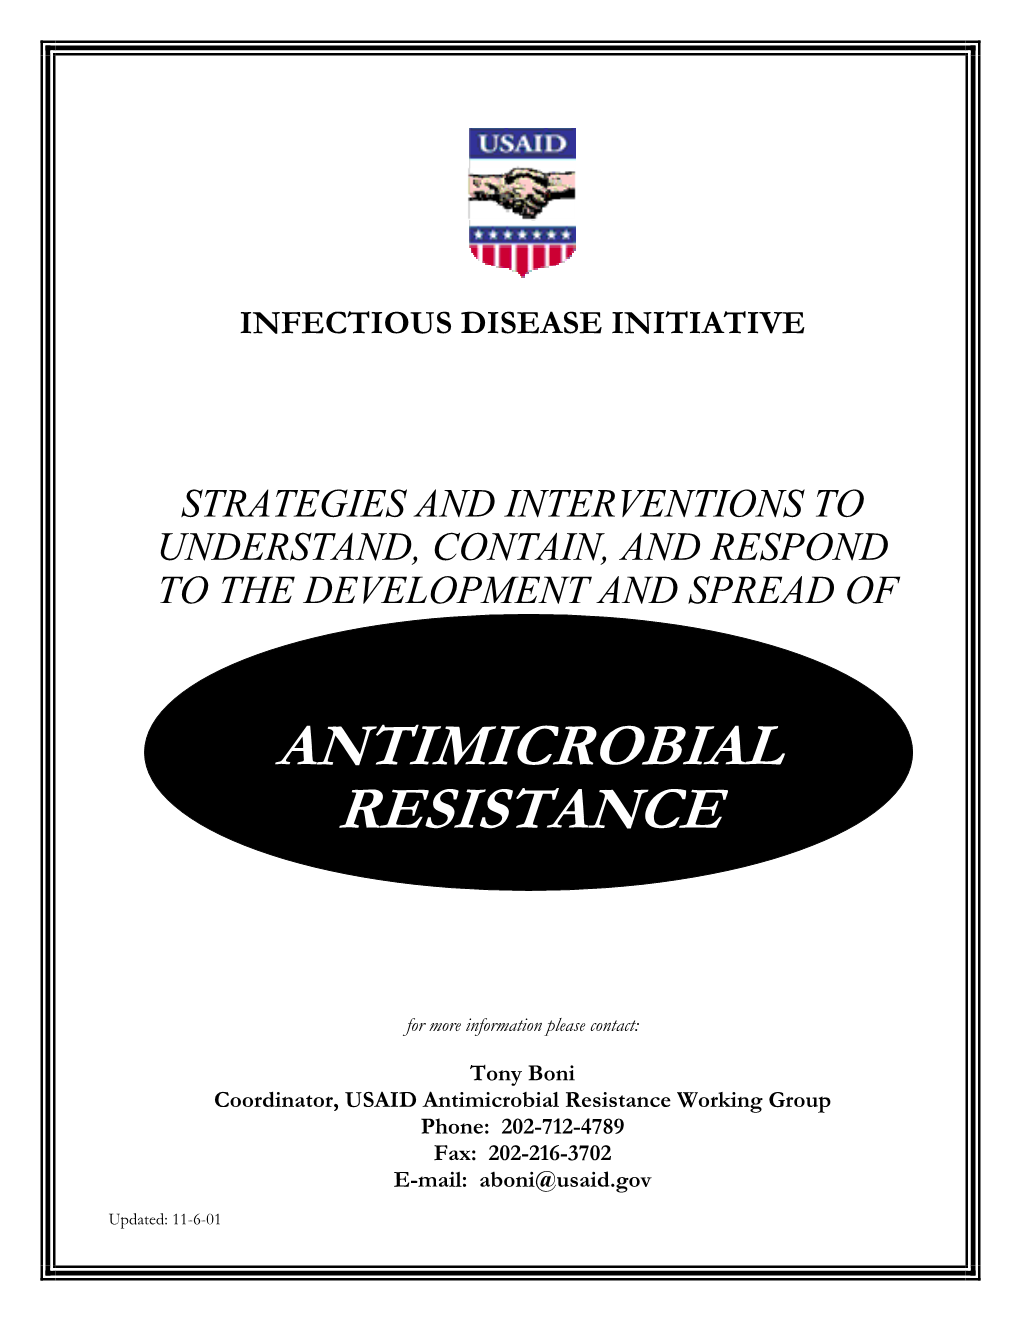 Antimicrobial Resistance Working Group Phone: 202-712-4789 Fax: 202-216-3702 E-Mail: Aboni@Usaid.Gov